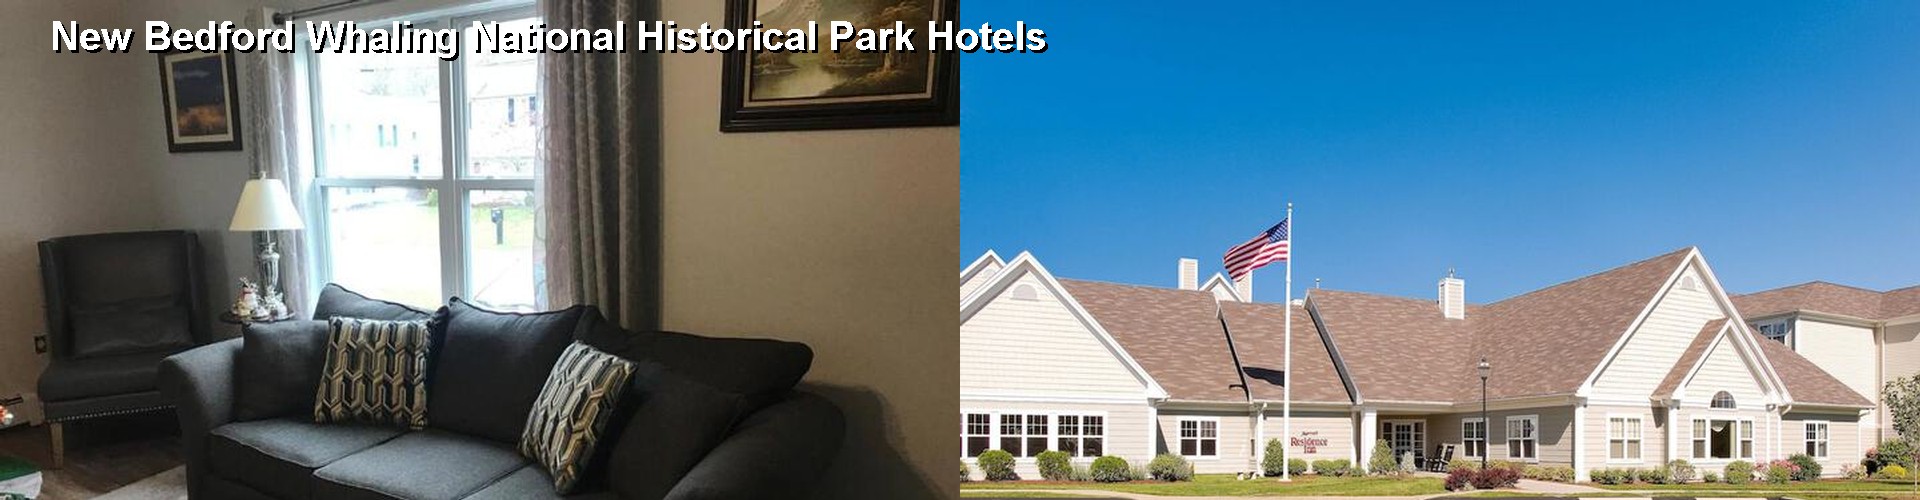 5 Best Hotels near New Bedford Whaling National Historical Park